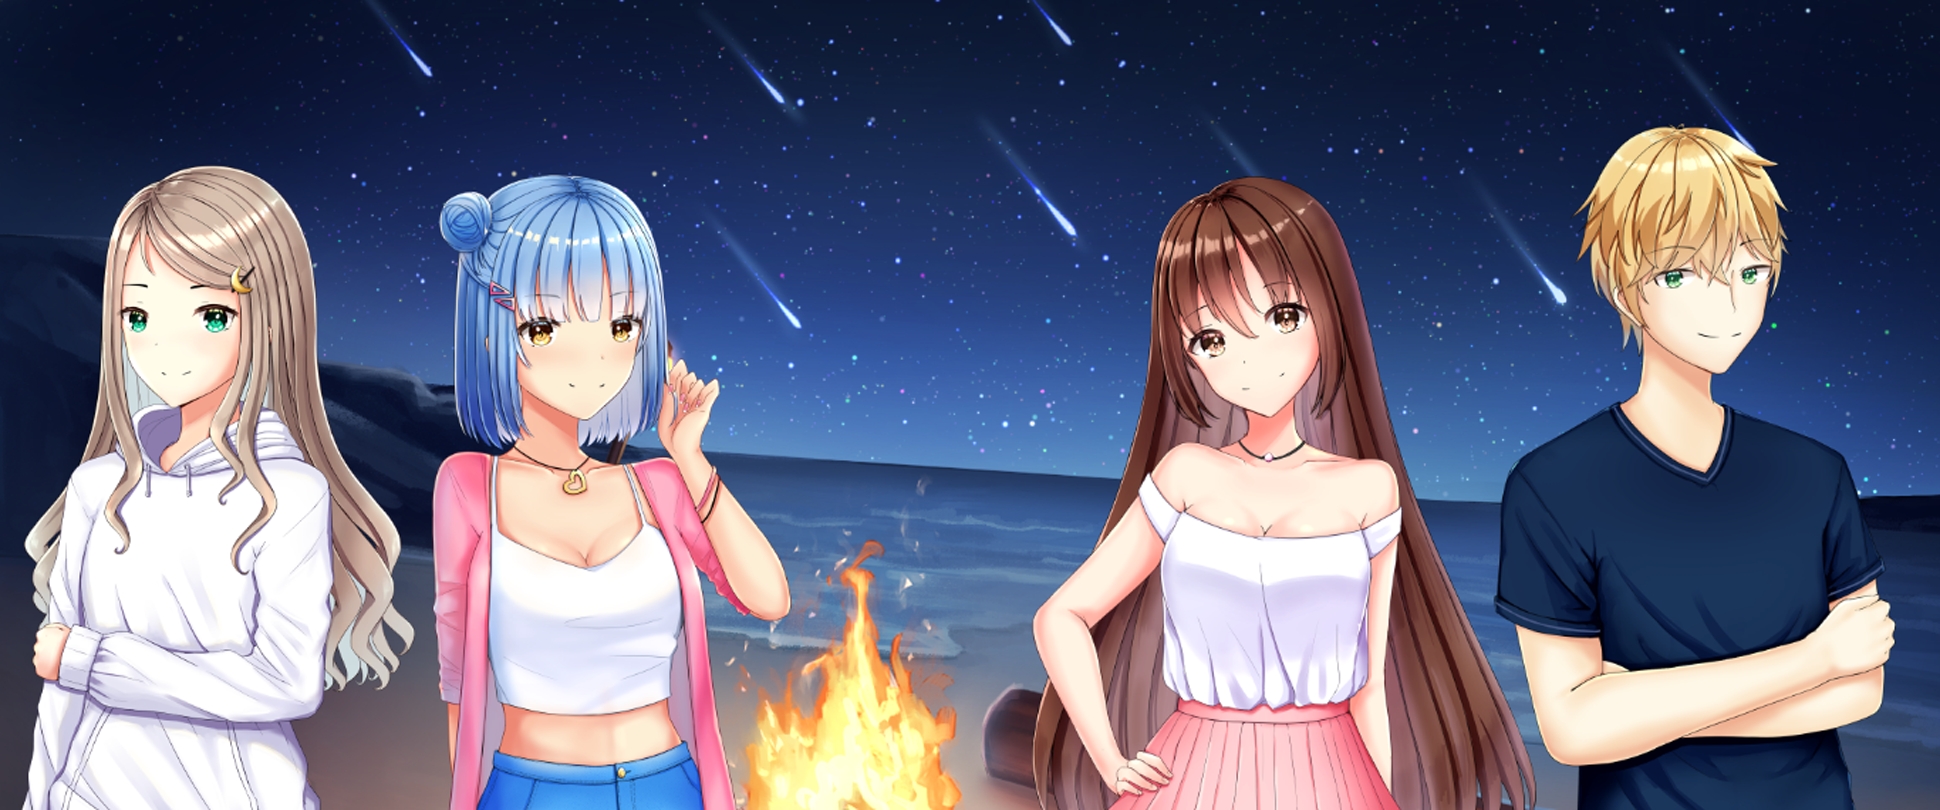 Wish On A Star With The Playable Demo Of Upcoming Visual Novel Starlight Shores